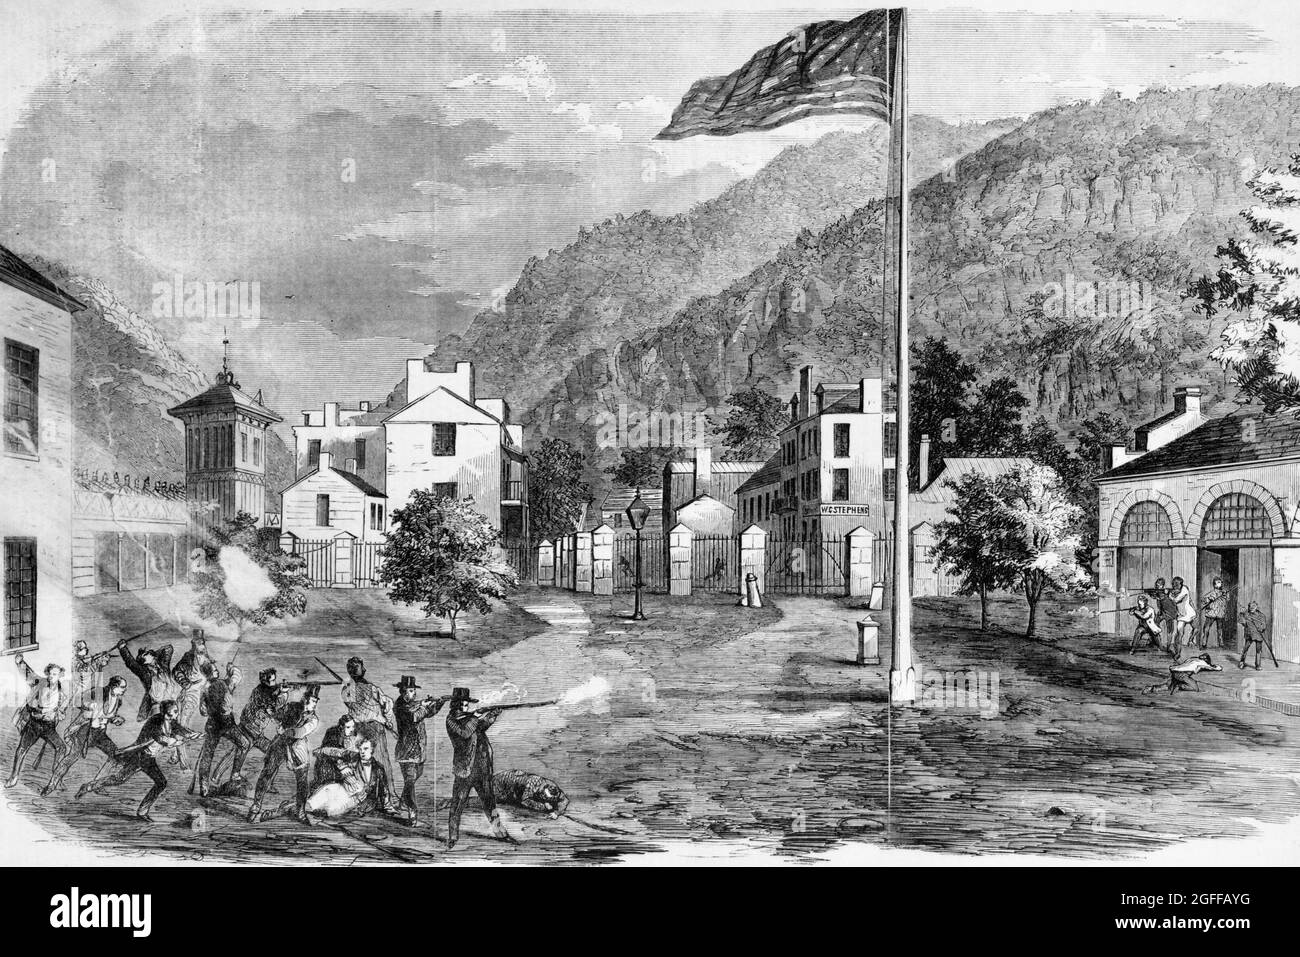 Harper's Ferry insurrection - the battle ground - Captain Alberts' party attacking the insurgents - view of the railroad bridge, the engine-house, and the village, 1859 Stock Photo